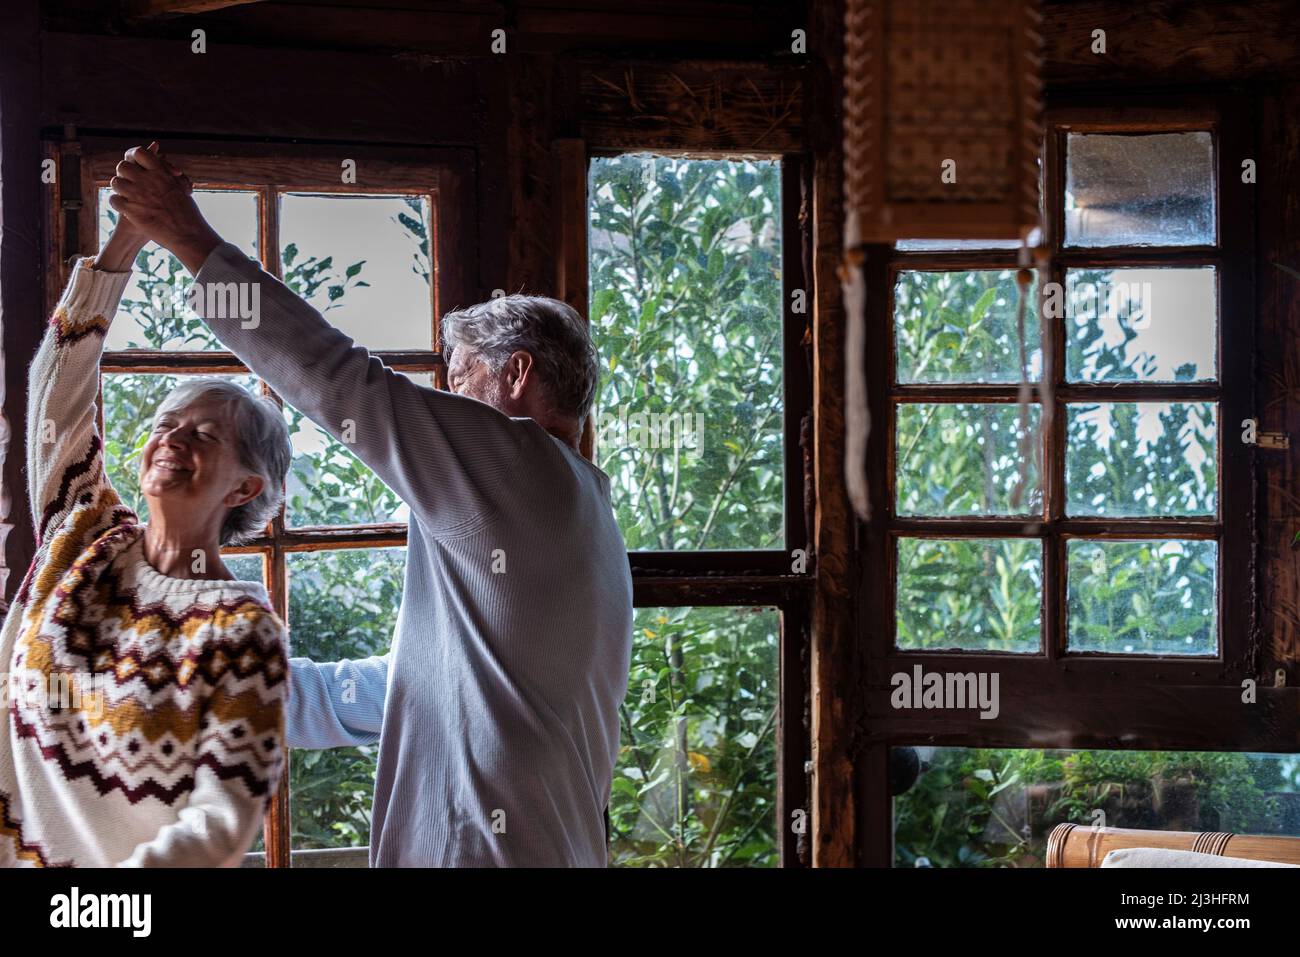 Elderly people happy lifesryle activity with two senior man and woman dancing excited at home for love and relationship - Mature couple have fun at the chalet during holiday vacation or mountains house life Stock Photo